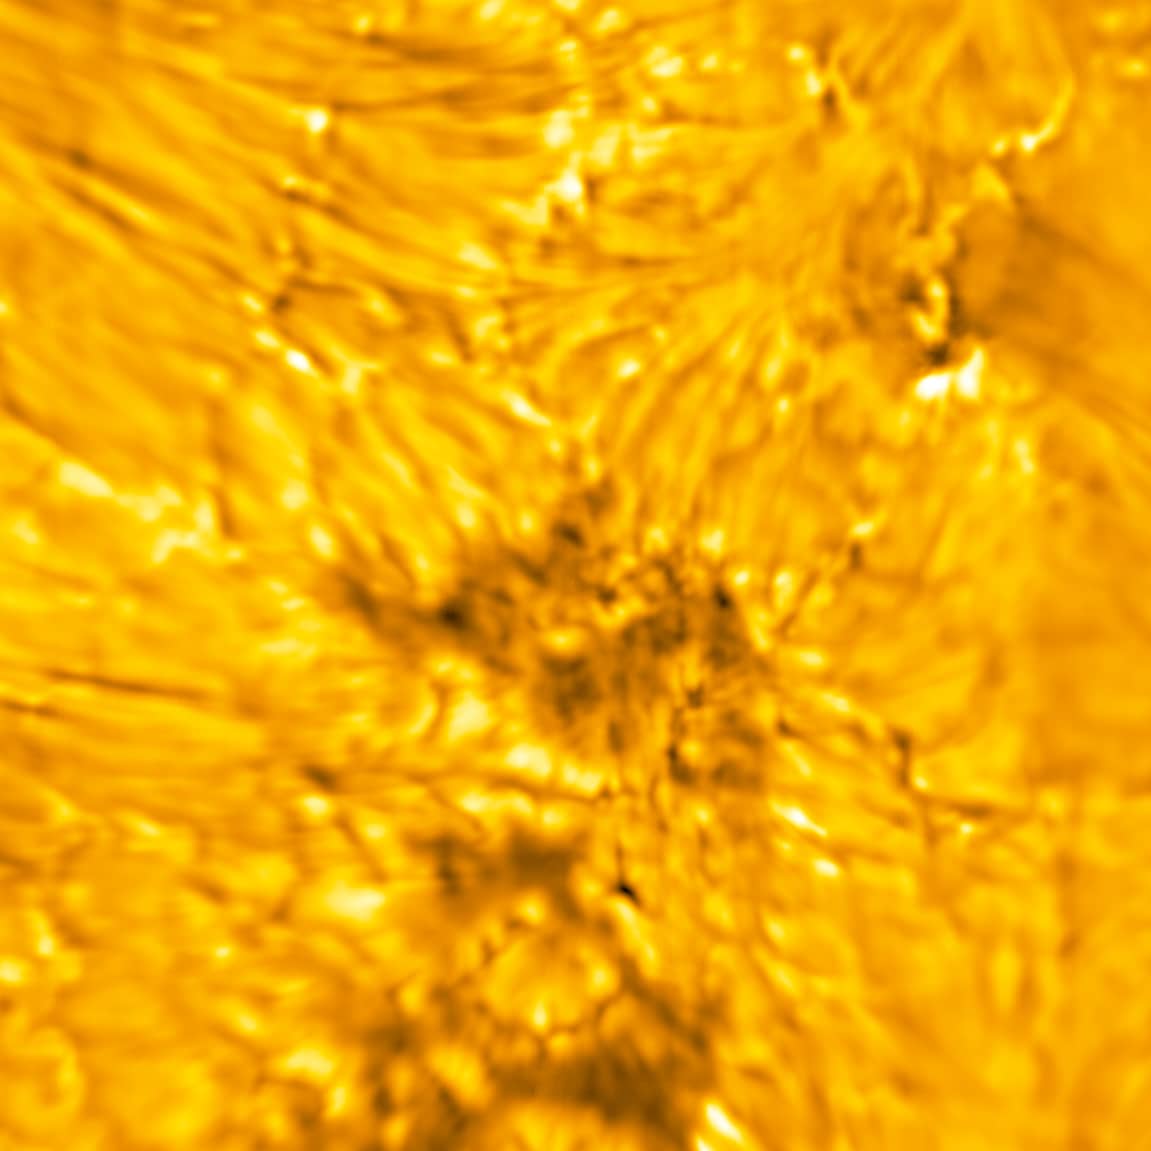 The lower atmosphere (chromosphere) of the Sun exists above the Sun’s surface (photosphere). In this image, dark, fine threads (fibrils) are visible in the chromosphere emanating from sources in the photosphere - notably, the dark pores/umbral fragments and their fine structure. A pore is a concentration of magnetic field where conditions are not met to form a penumbra. Pores are essentially sunspots that have not had or will never have a penumbra. Penumbra: The brighter, surrounding region of a sunspot’s umbra characterized by bright filamentary structures. Image Title: Pores/Umbral Fragments, Fibrils, and other Fine-Structure in the Sun’s Atmosphere and Surface PID: PID_1_16 Image Credit: NSF/AURA/NSO Image Processing: Friedrich Wöger(NSO), Catherine Fischer (NSO) Science Credit: Juan Martínez-Sykora (Bay Area Environmental Research Institute)